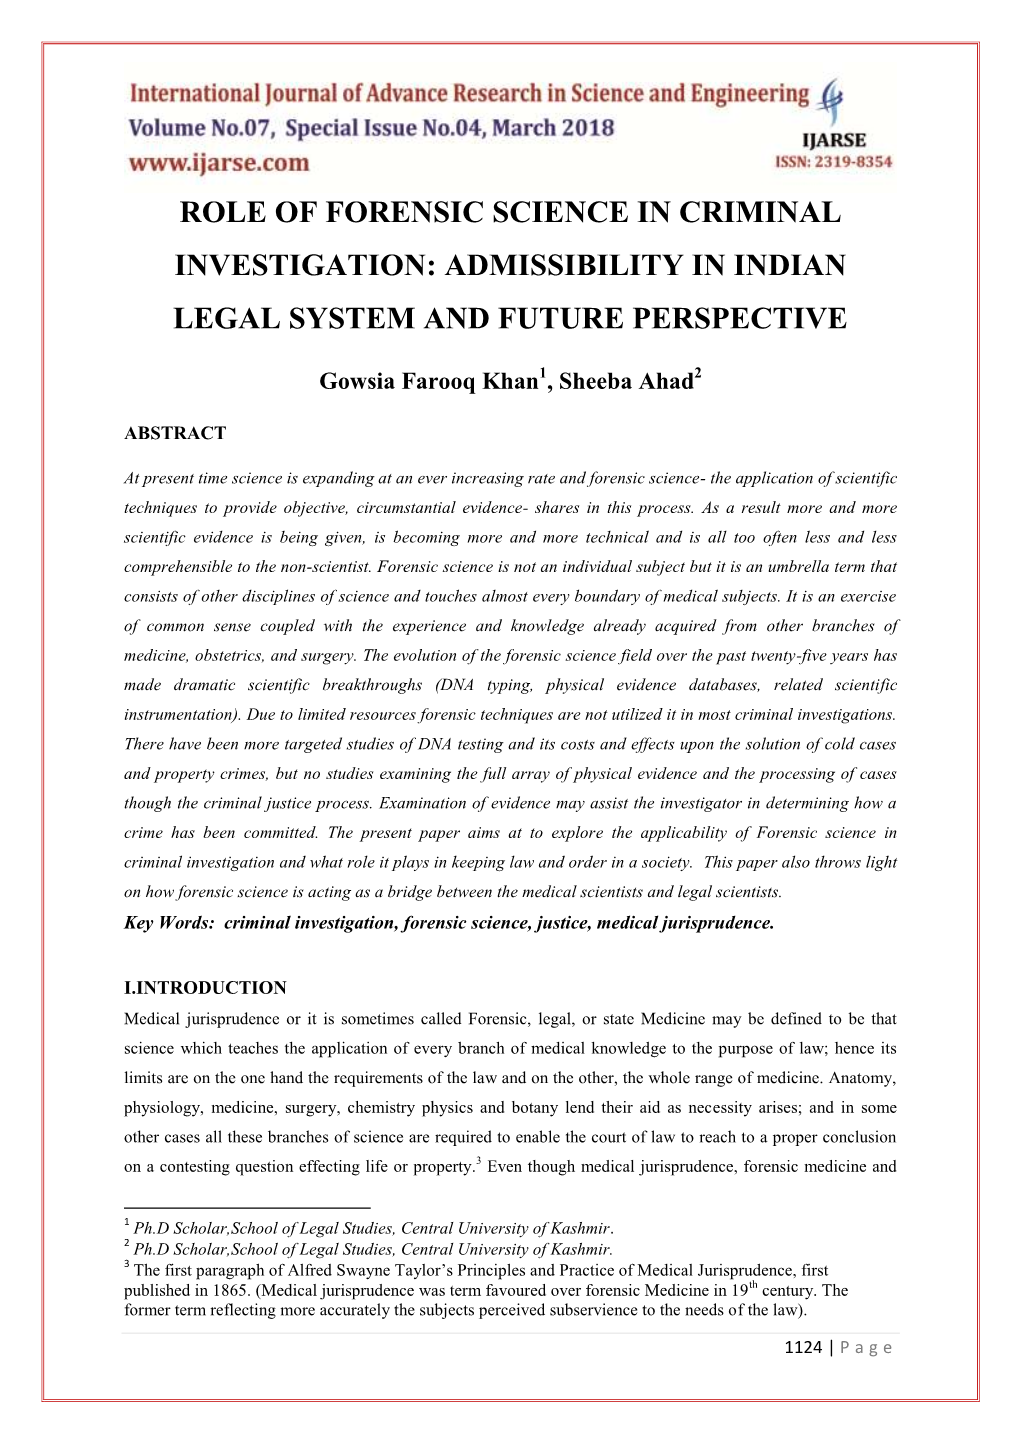 Role of Forensic Science in Criminal Investigation: Admissibility in Indian Legal System and Future Perspective